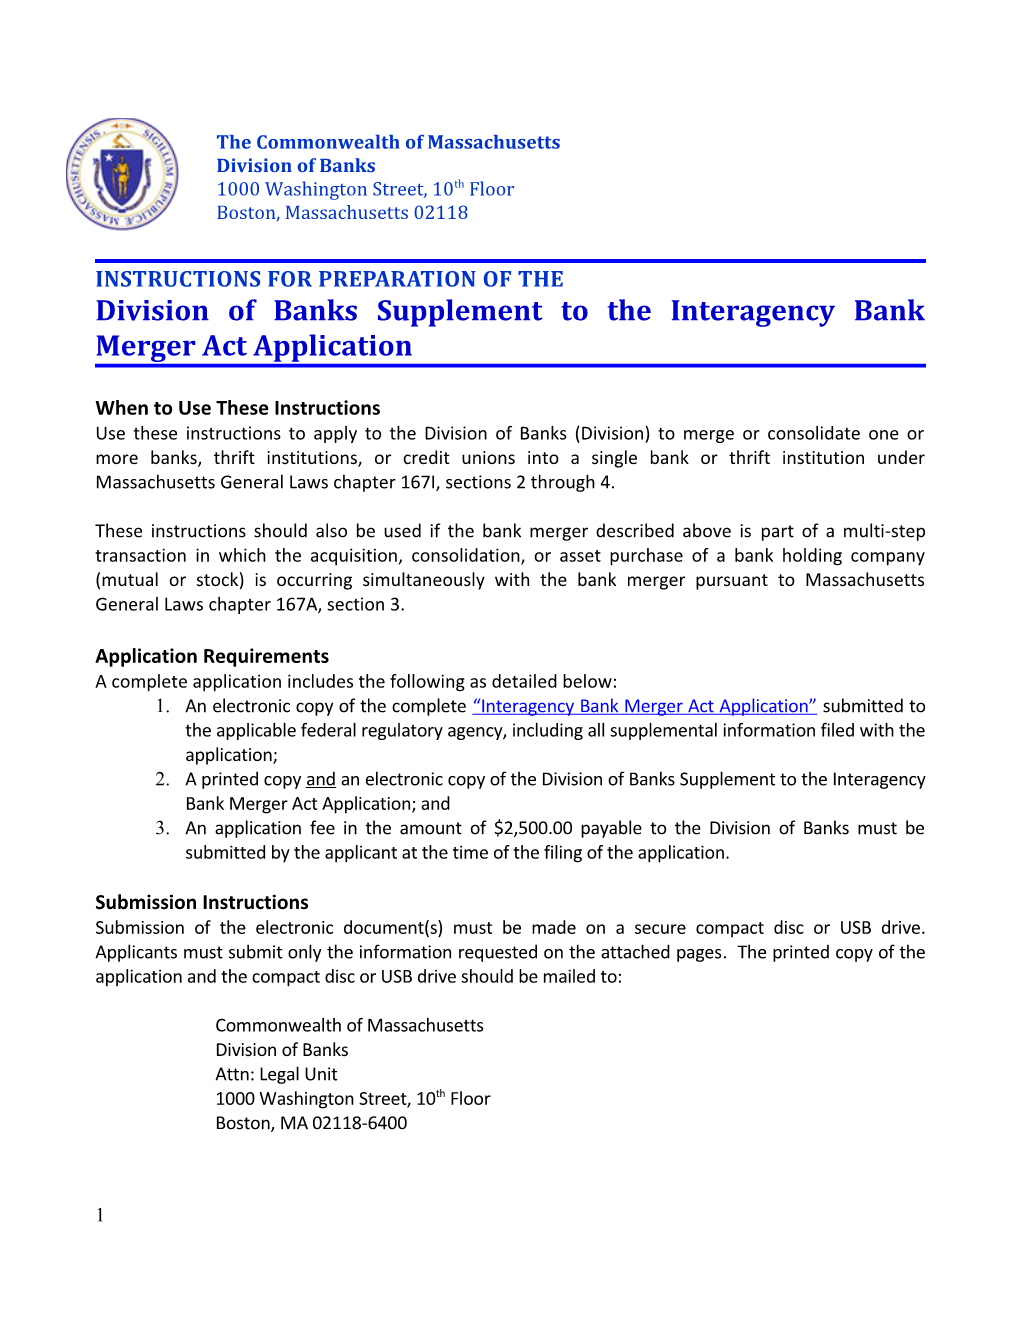 Division of Banks Supplement to the Interagency Bank Merger Actapplication